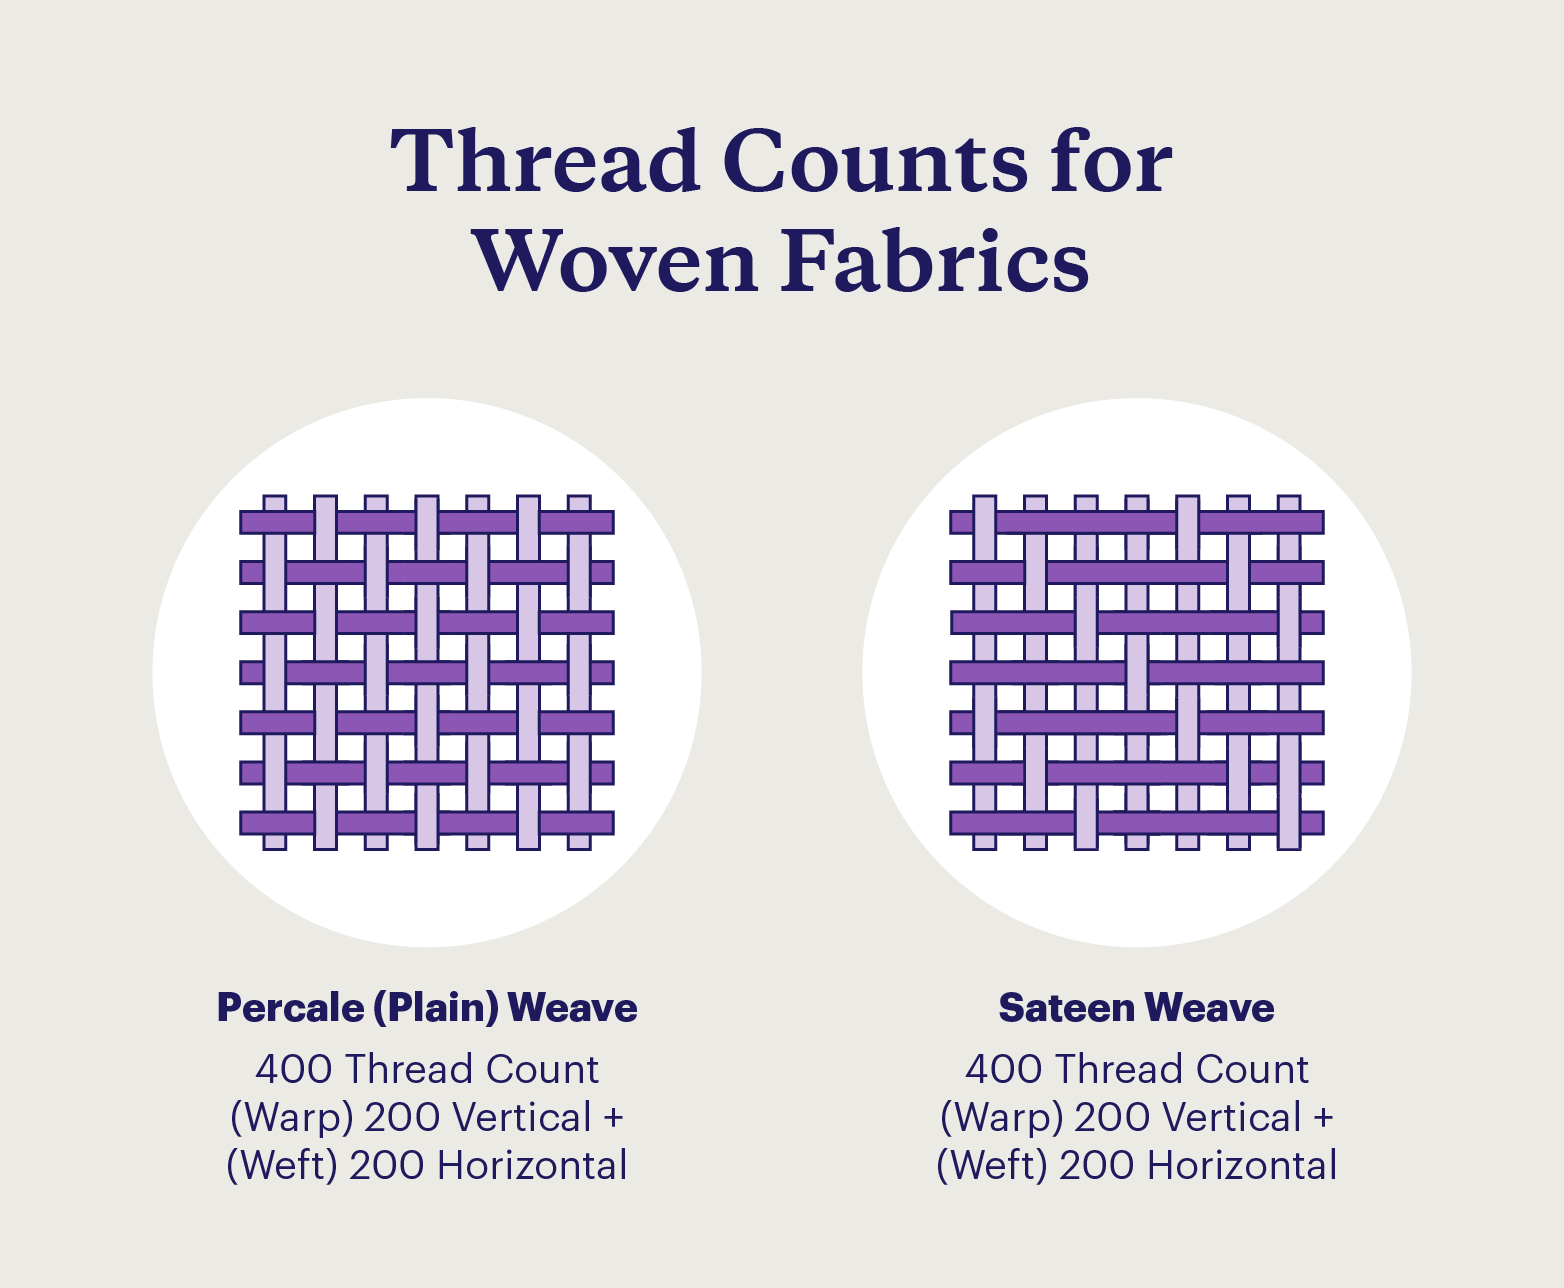 A graphic demonstrates thread counts for woven fabrics.